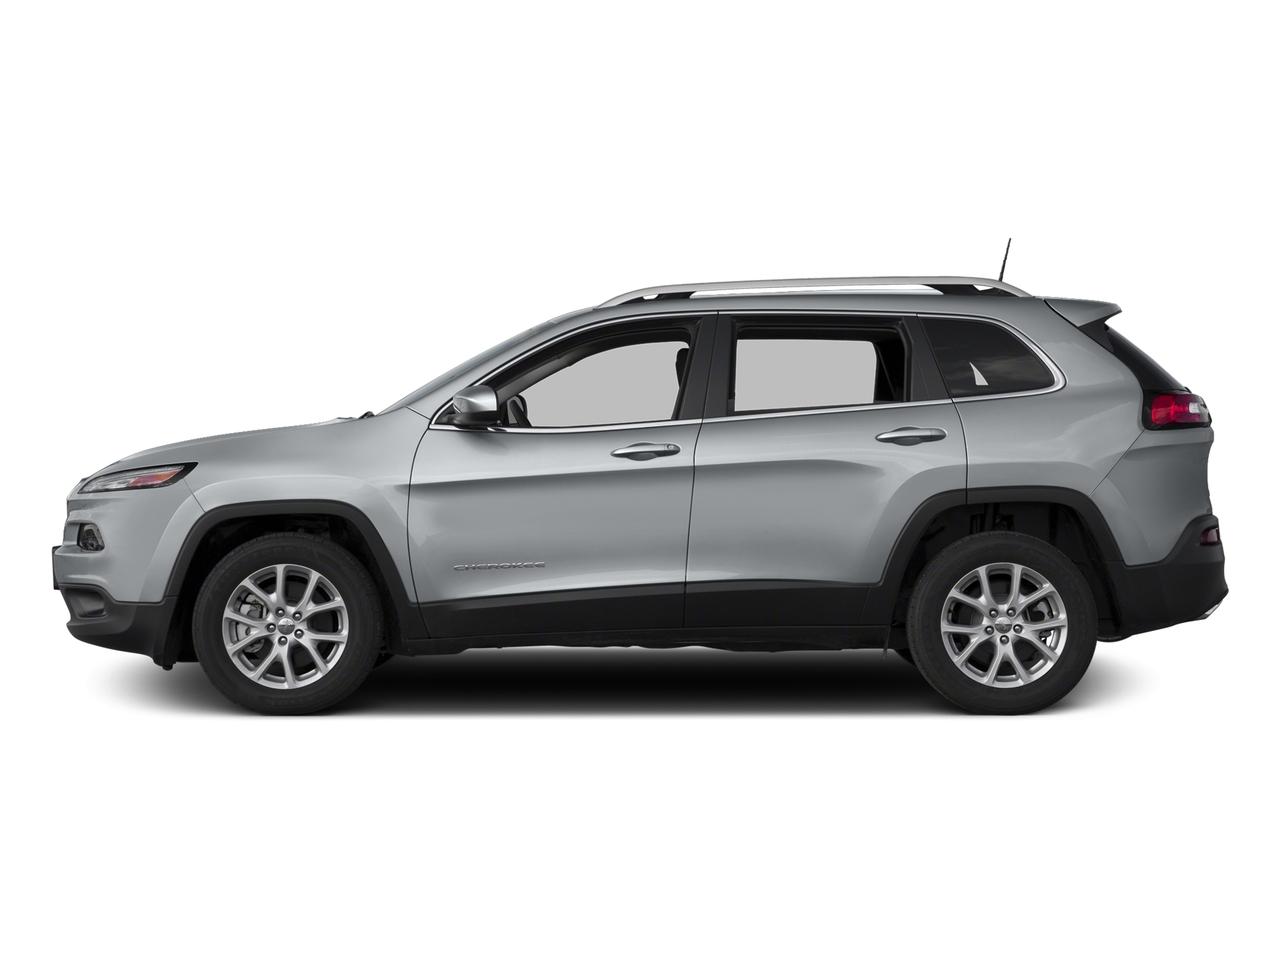 Used 2017 Jeep Cherokee Latitude with VIN 1C4PJMCB0HW656031 for sale in Creston, IA